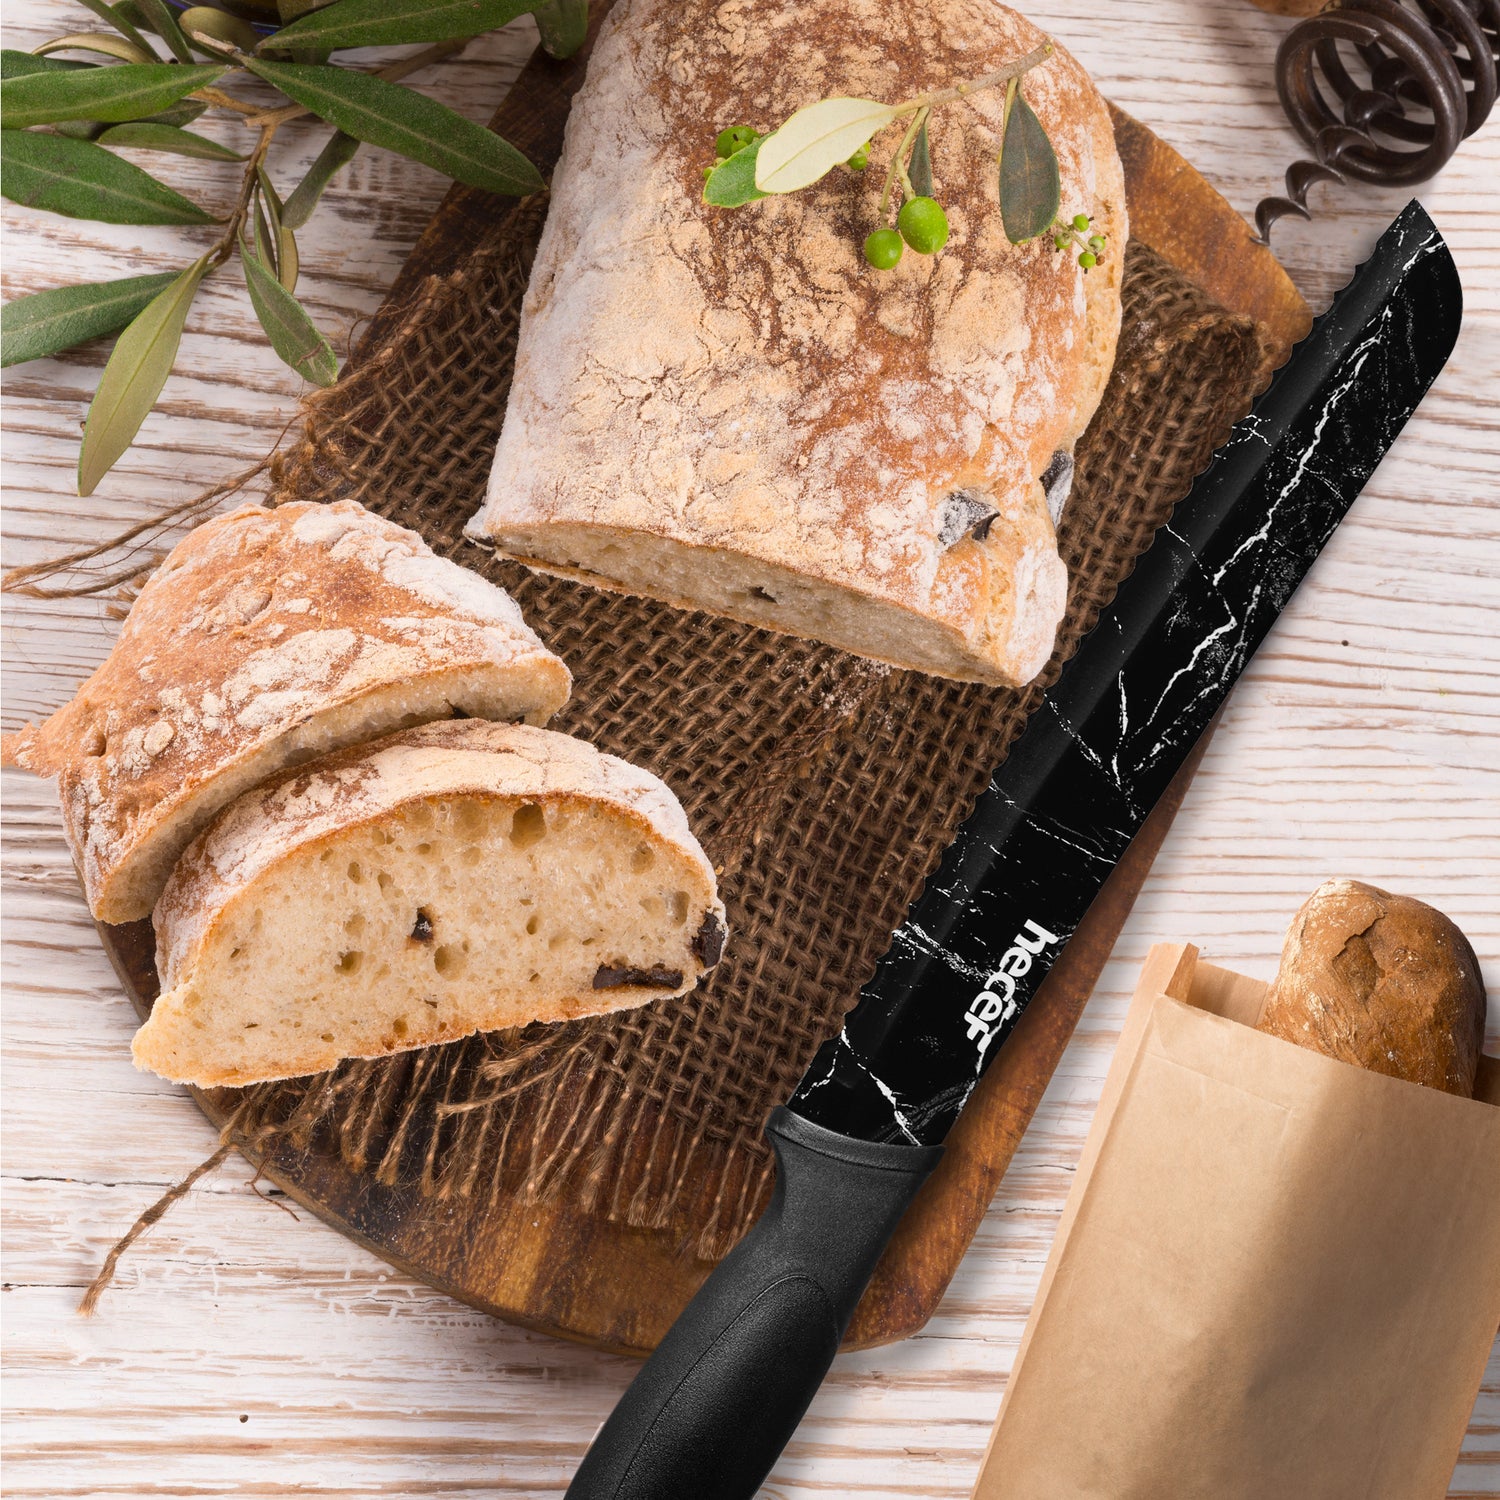 hecef Kitchen Knife Set of 5, Sharp Stainless Steel wtih Black Marble Pattern, Professional Cooking Knives Set Including Paring, Utility, Bread, Carving, Santoku & Chef Knife - Hecef Kitchen